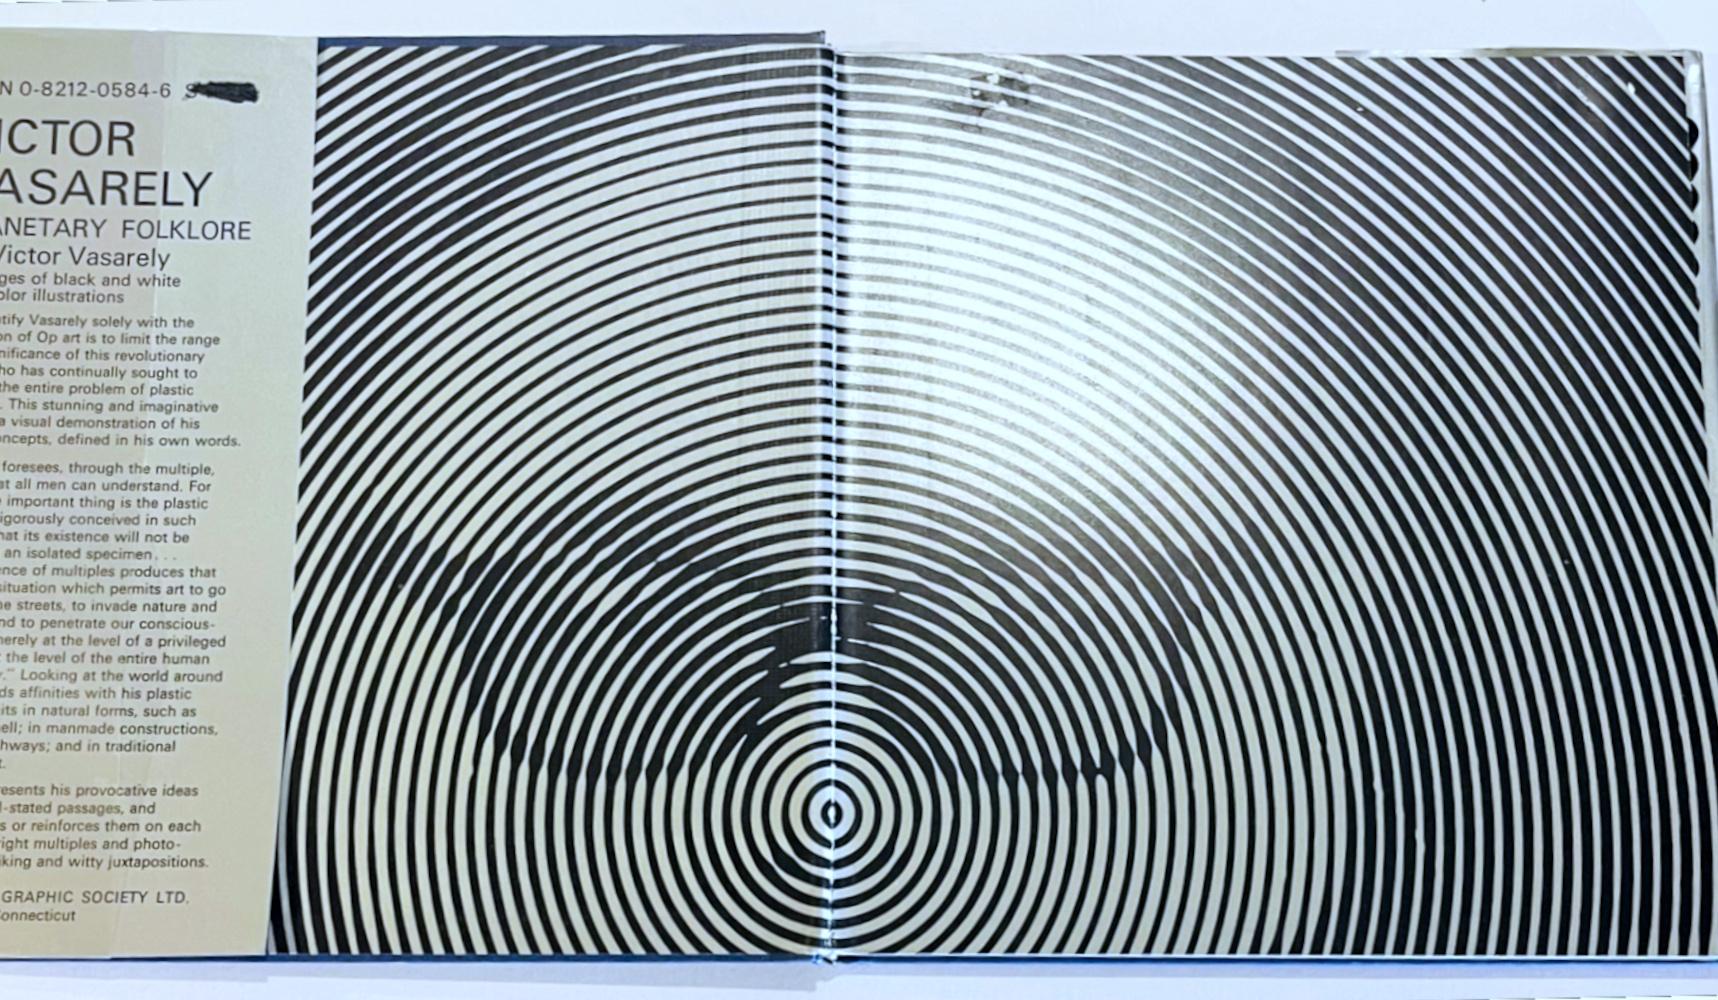 Vintage Hardback Monograph: Planetary Folklore (Hand signed by Victor Vasarely) For Sale 7